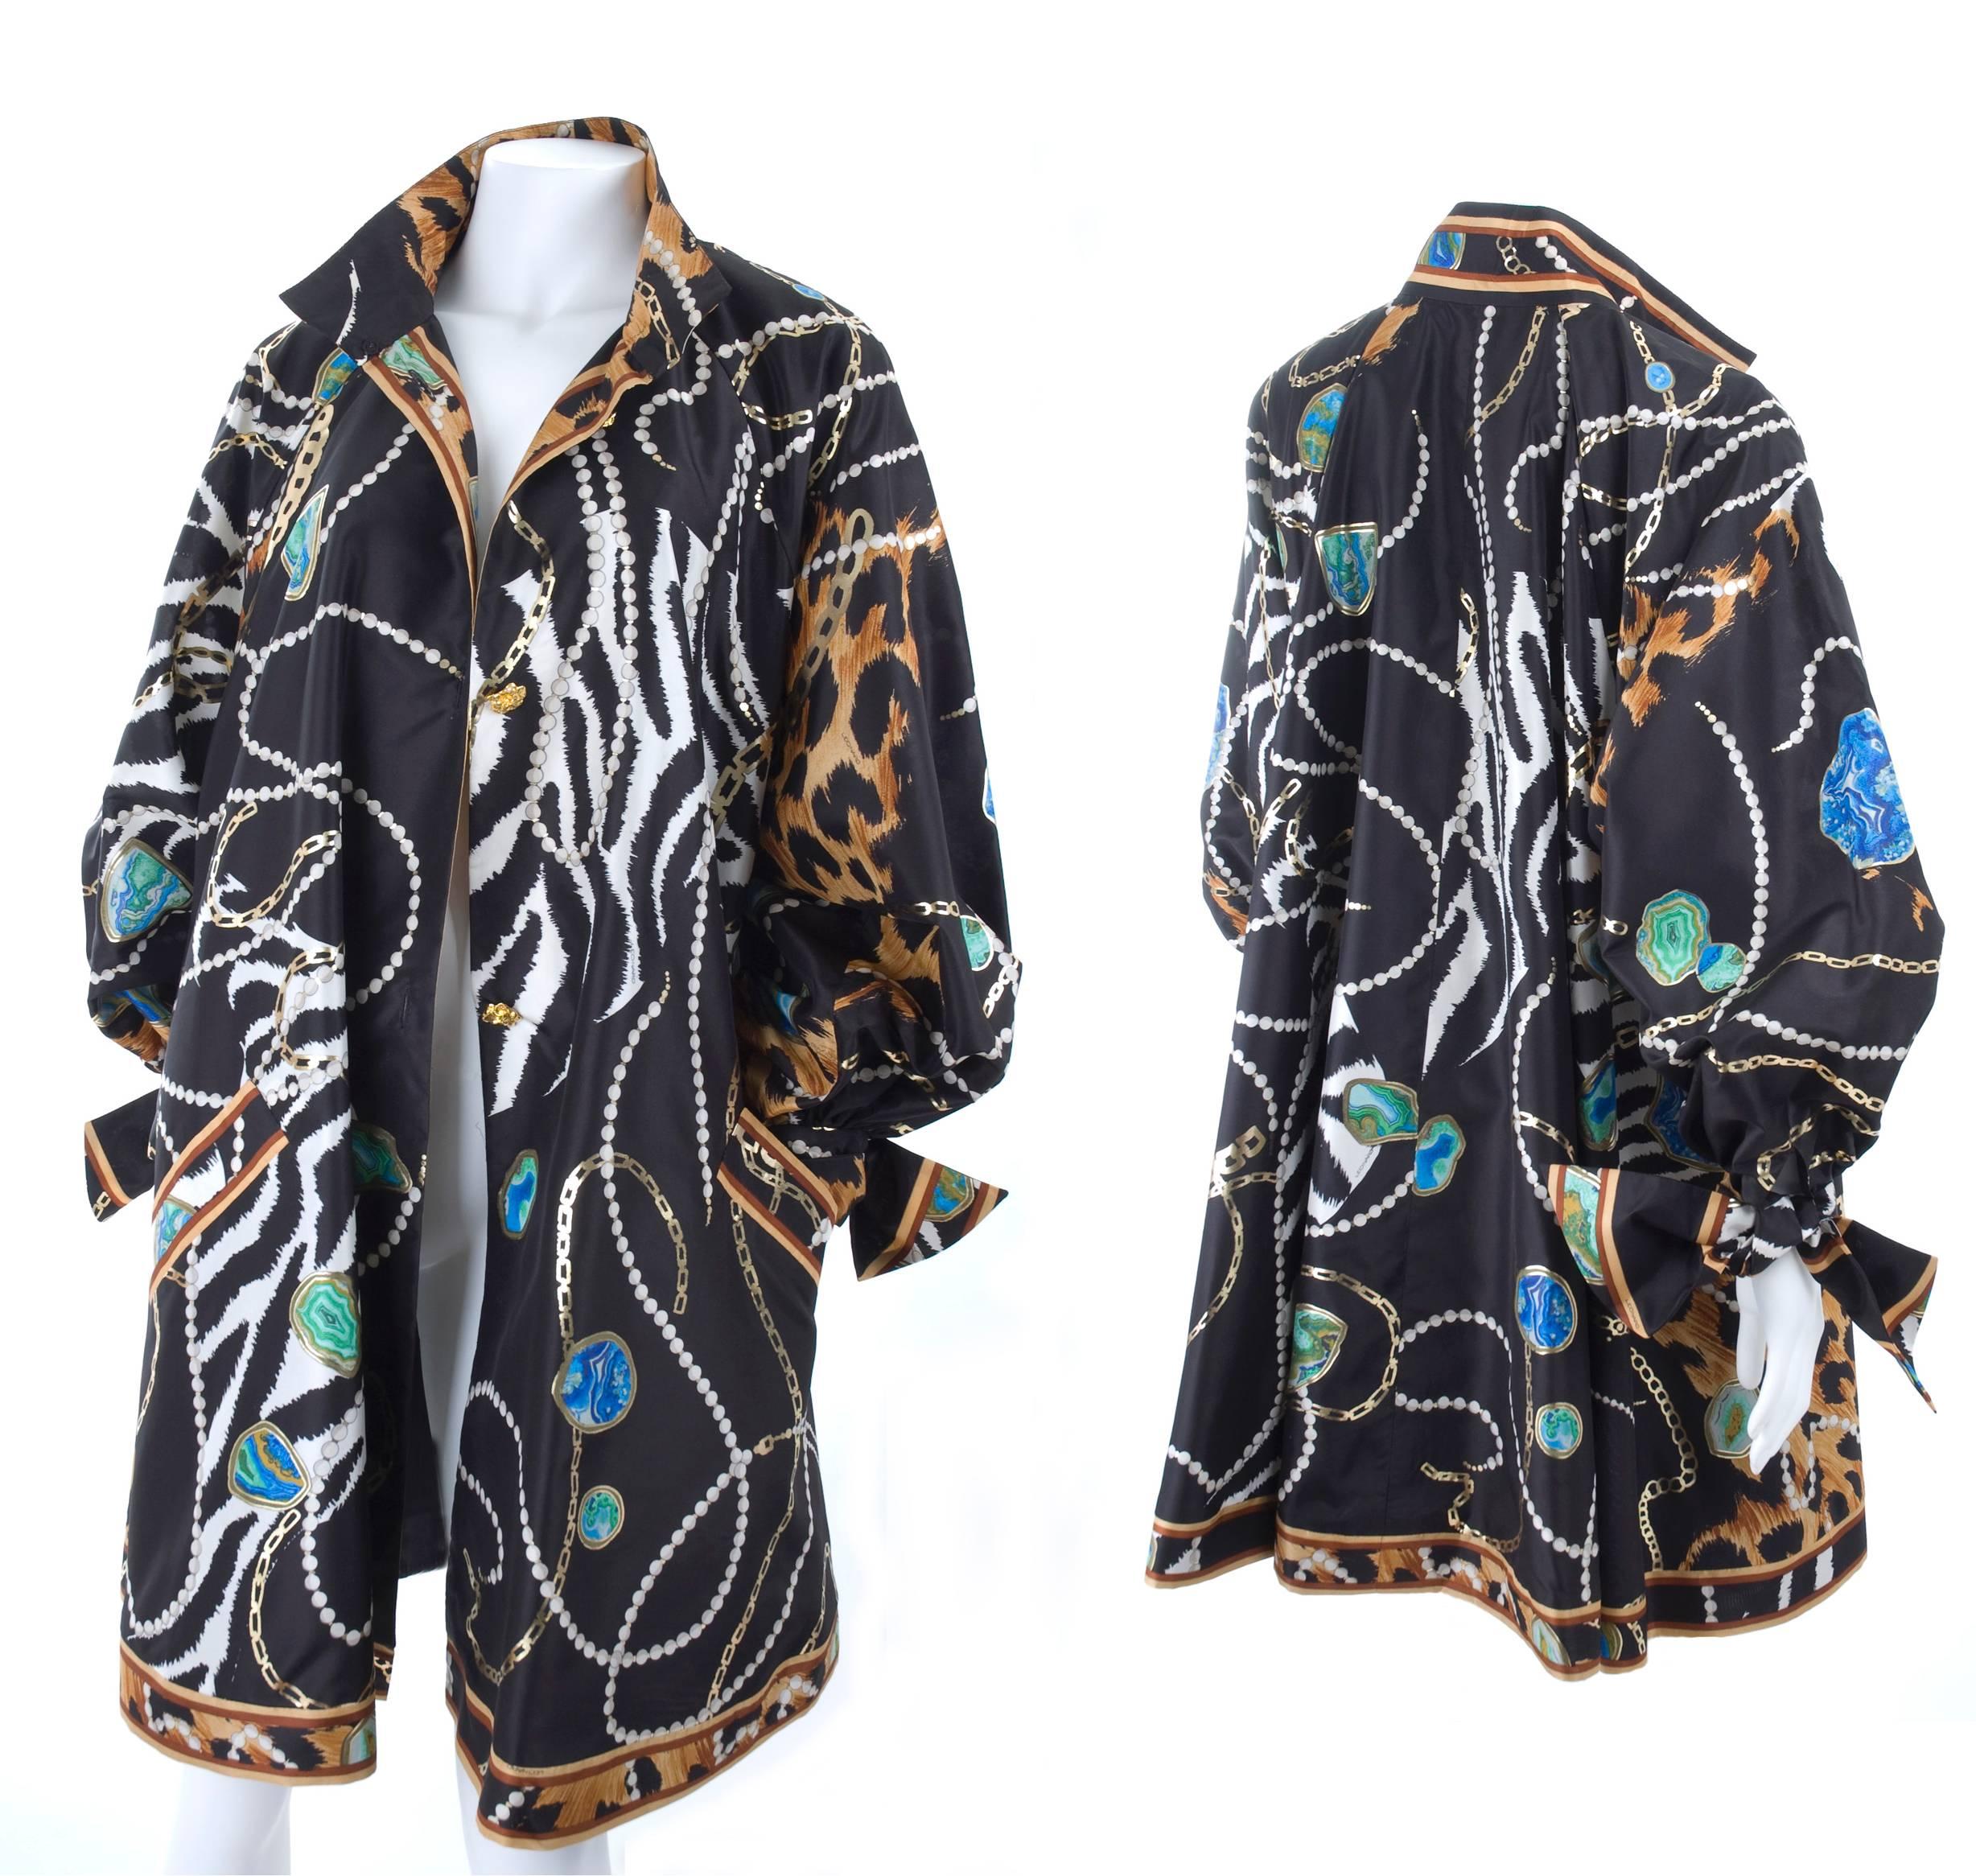 Leonard A-line swing coat with leopard, gold chains, pearls and gemstones hand printed 
100% Silk, 3 Button closure, unlined.
Size  M
Excellent condition - no flaws to mention.

Measurements:
Length 35 bust up to 49 inches